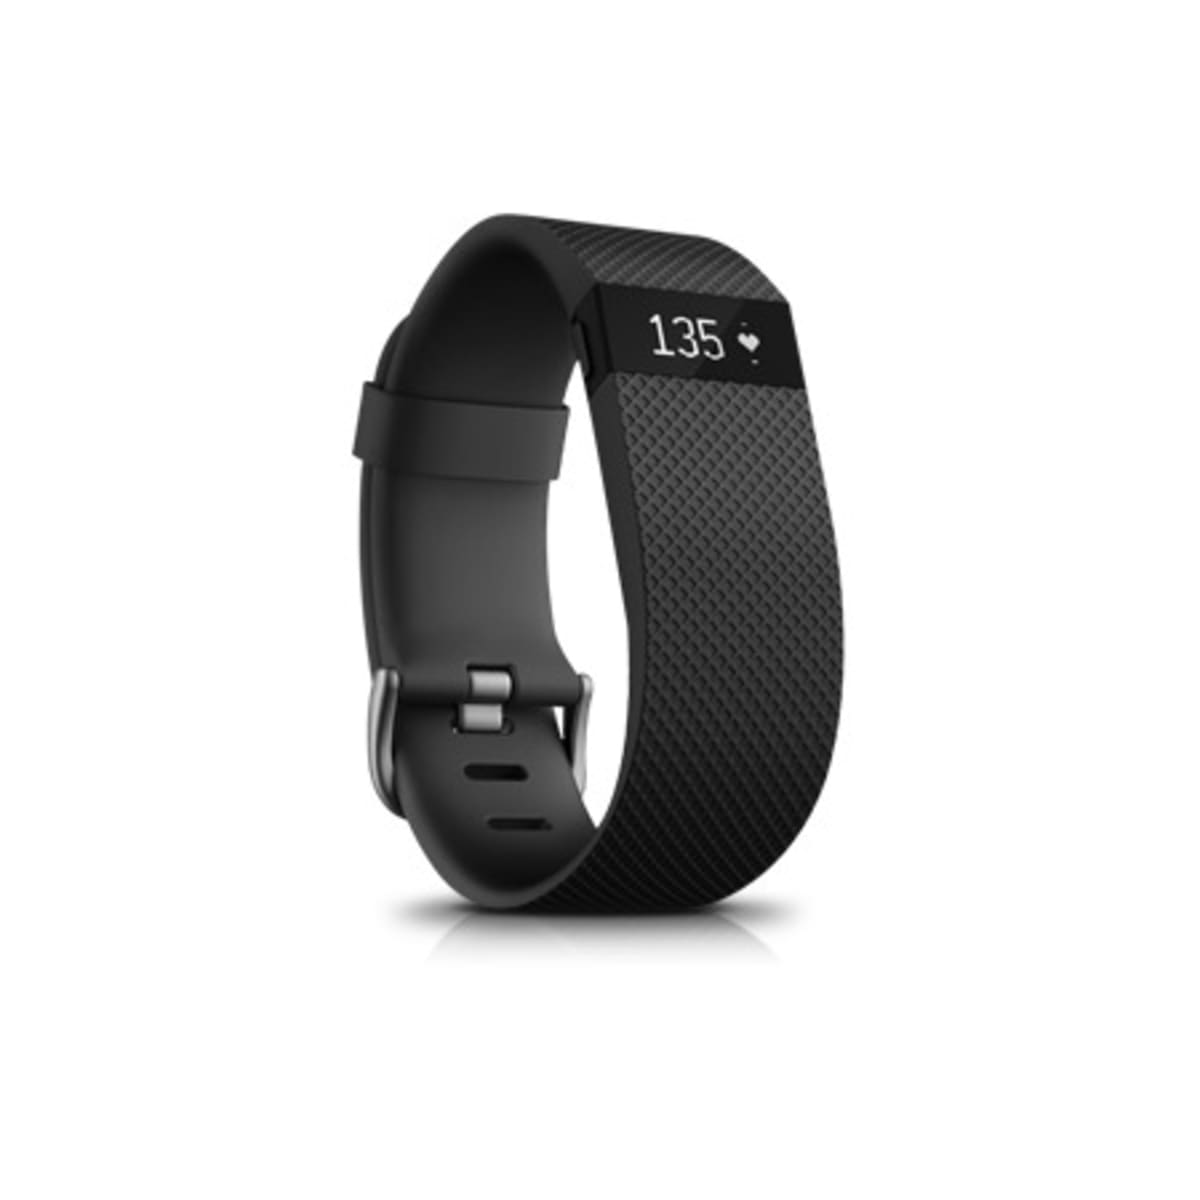  Fitbit Charge Wireless Activity Wristband, Fitness